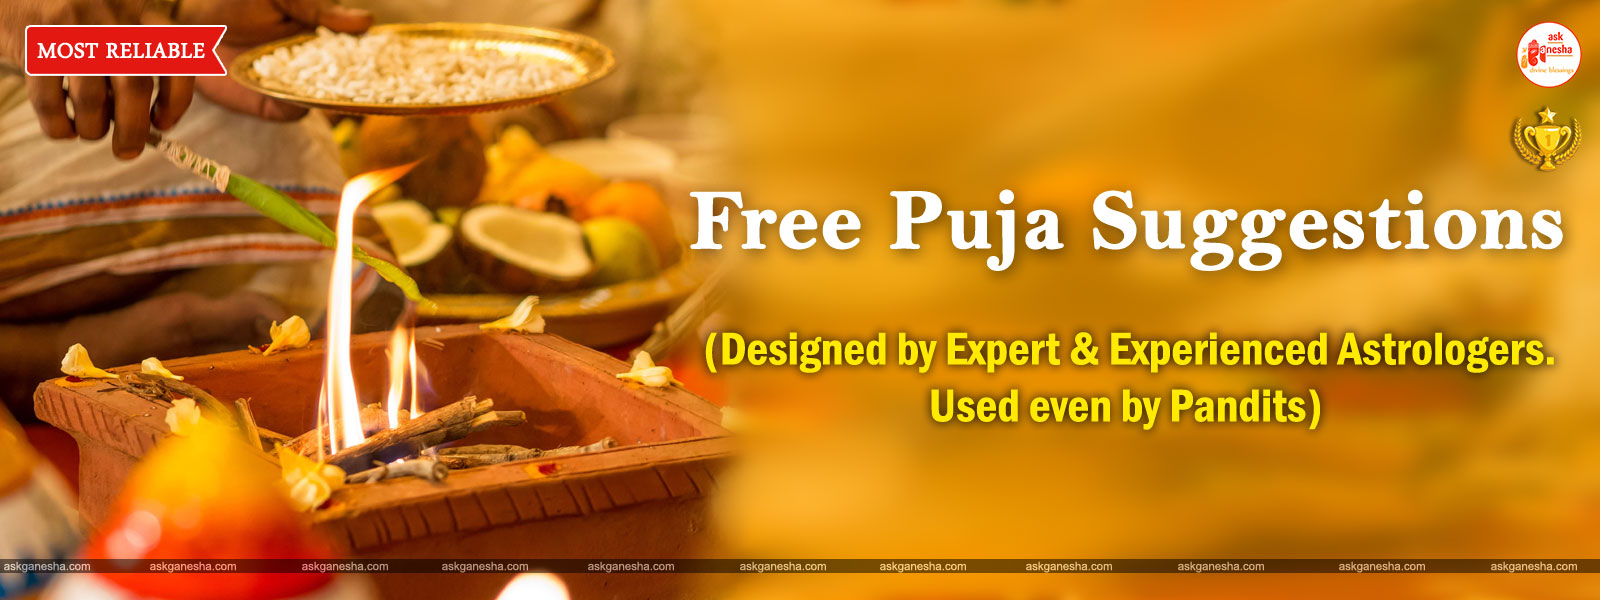 Free Puja Suggestions